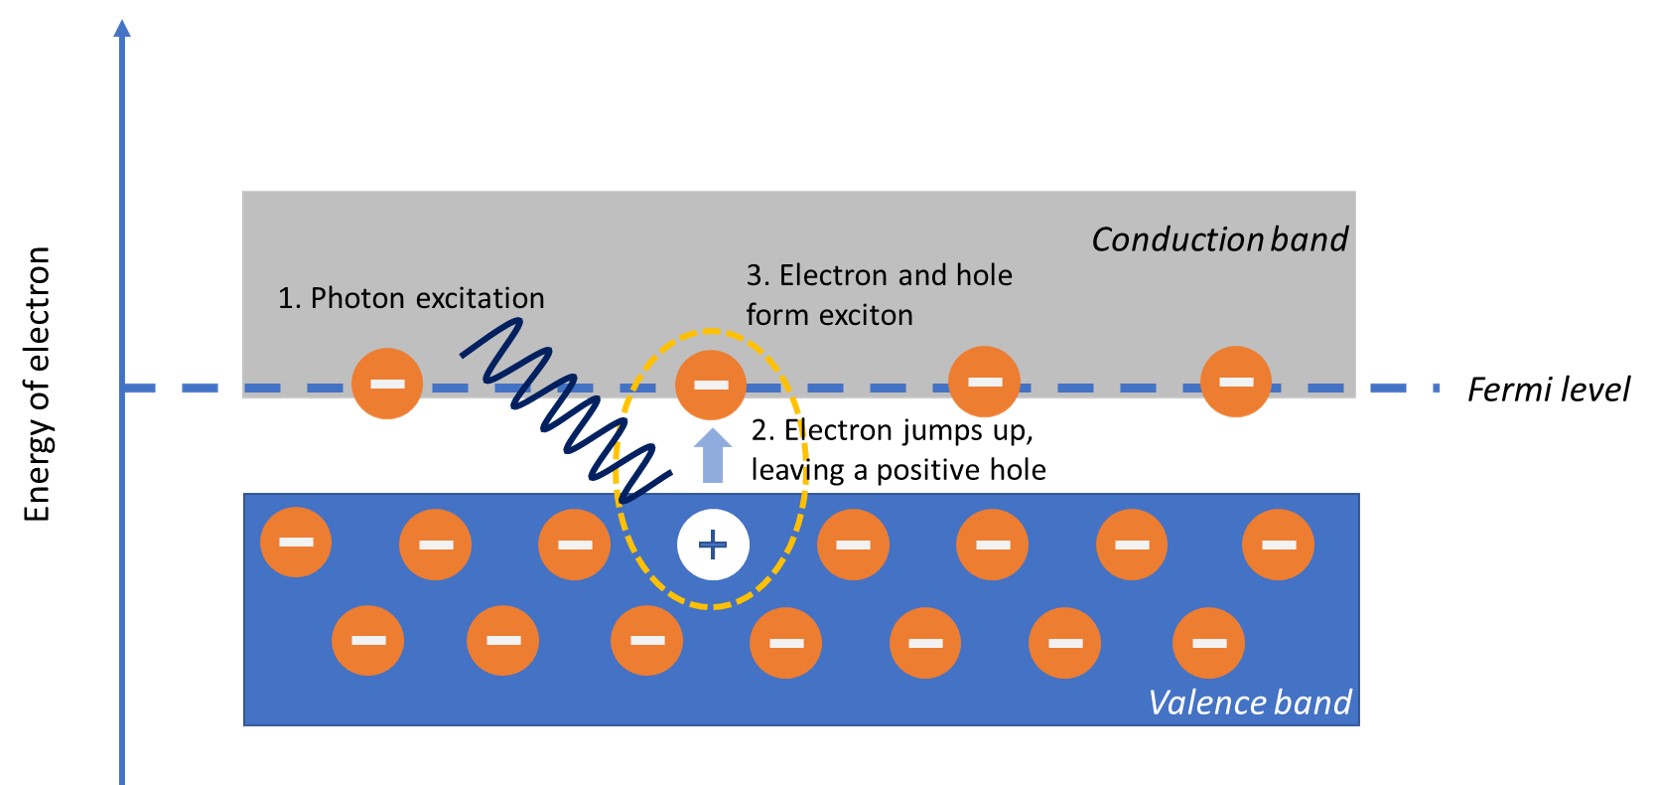 exciton formation using light energy